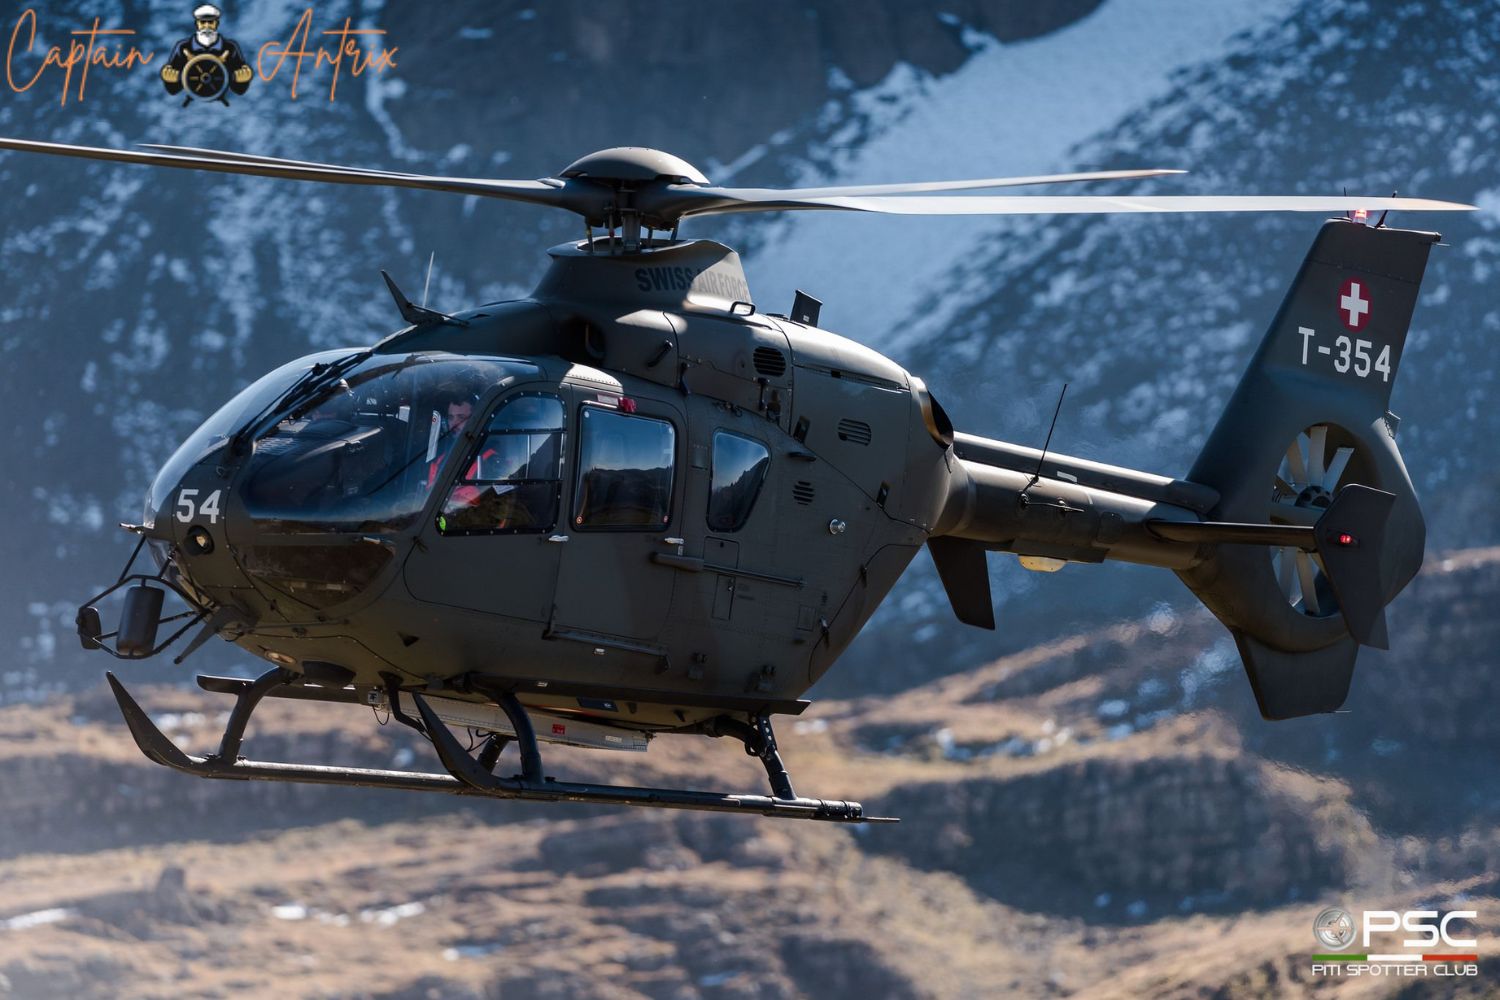 Swiss Air Force's Milestone: 100,000 Flight Hours with the H135 Helicopter